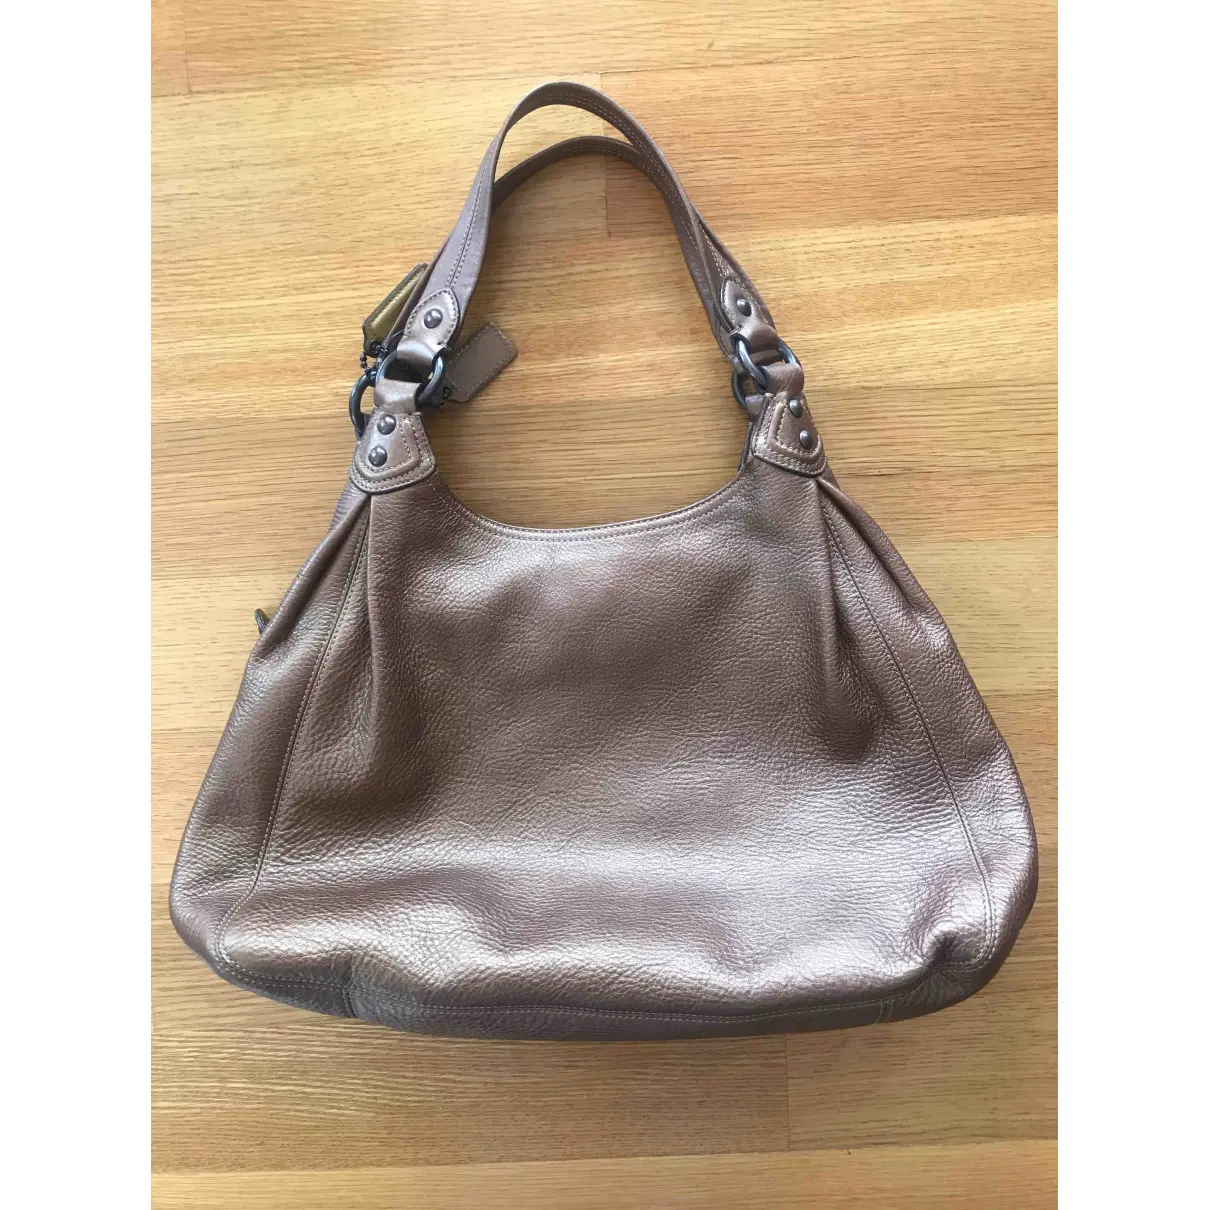 Buy Coach Leather purse online